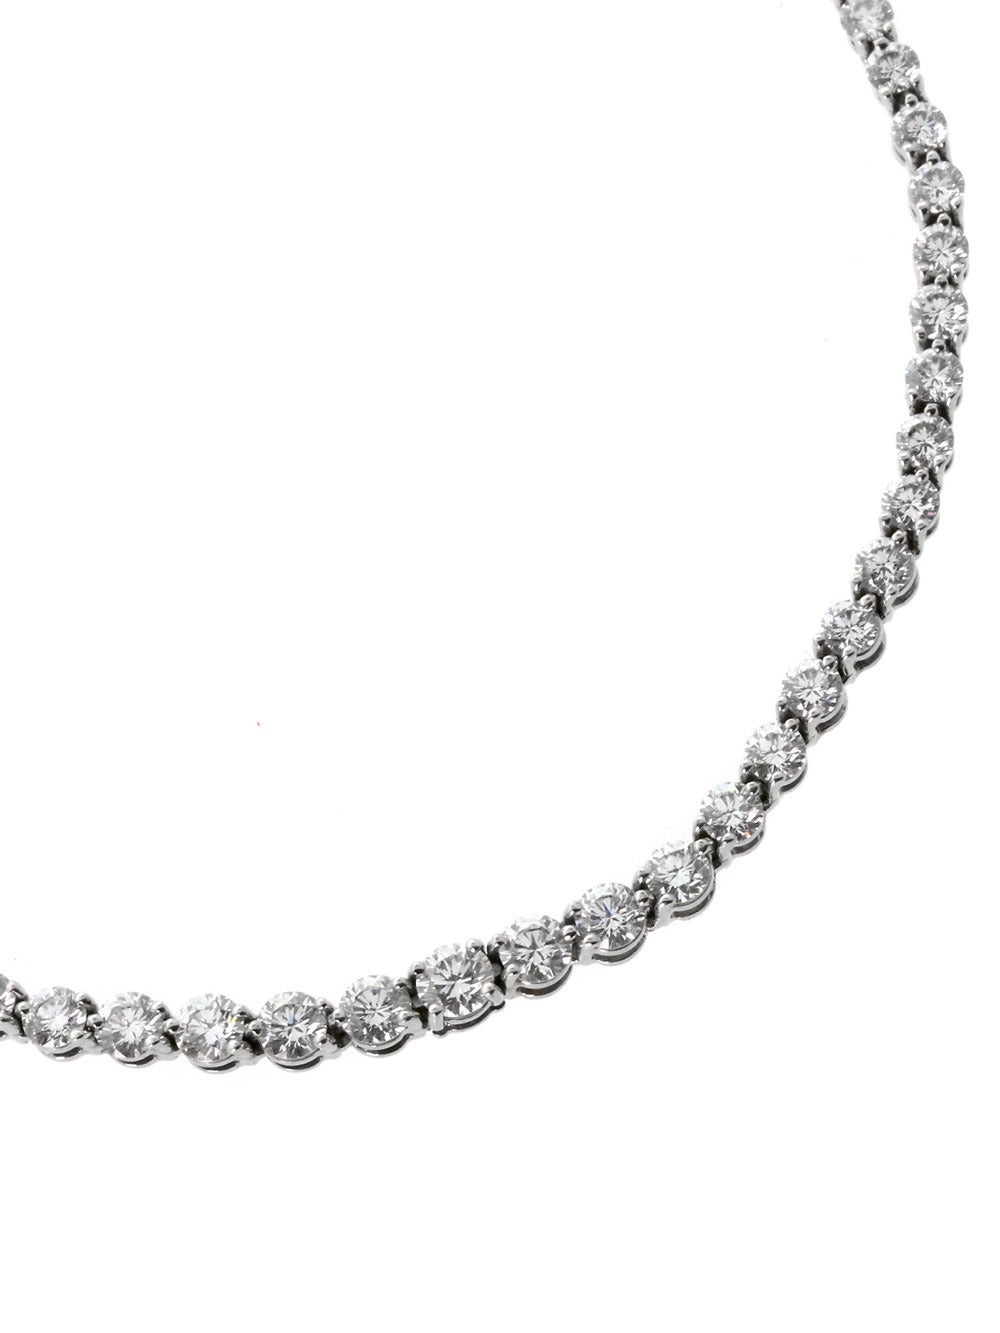 A positively marvelous Diamond & Platinum Necklace from Tiffany & Co.! Boasting a titanic 10 carats (approximately) of VS1 Round Brilliant Cut Diamonds running the full length of the sleek Platinum Necklace, this is a spectacular piece which